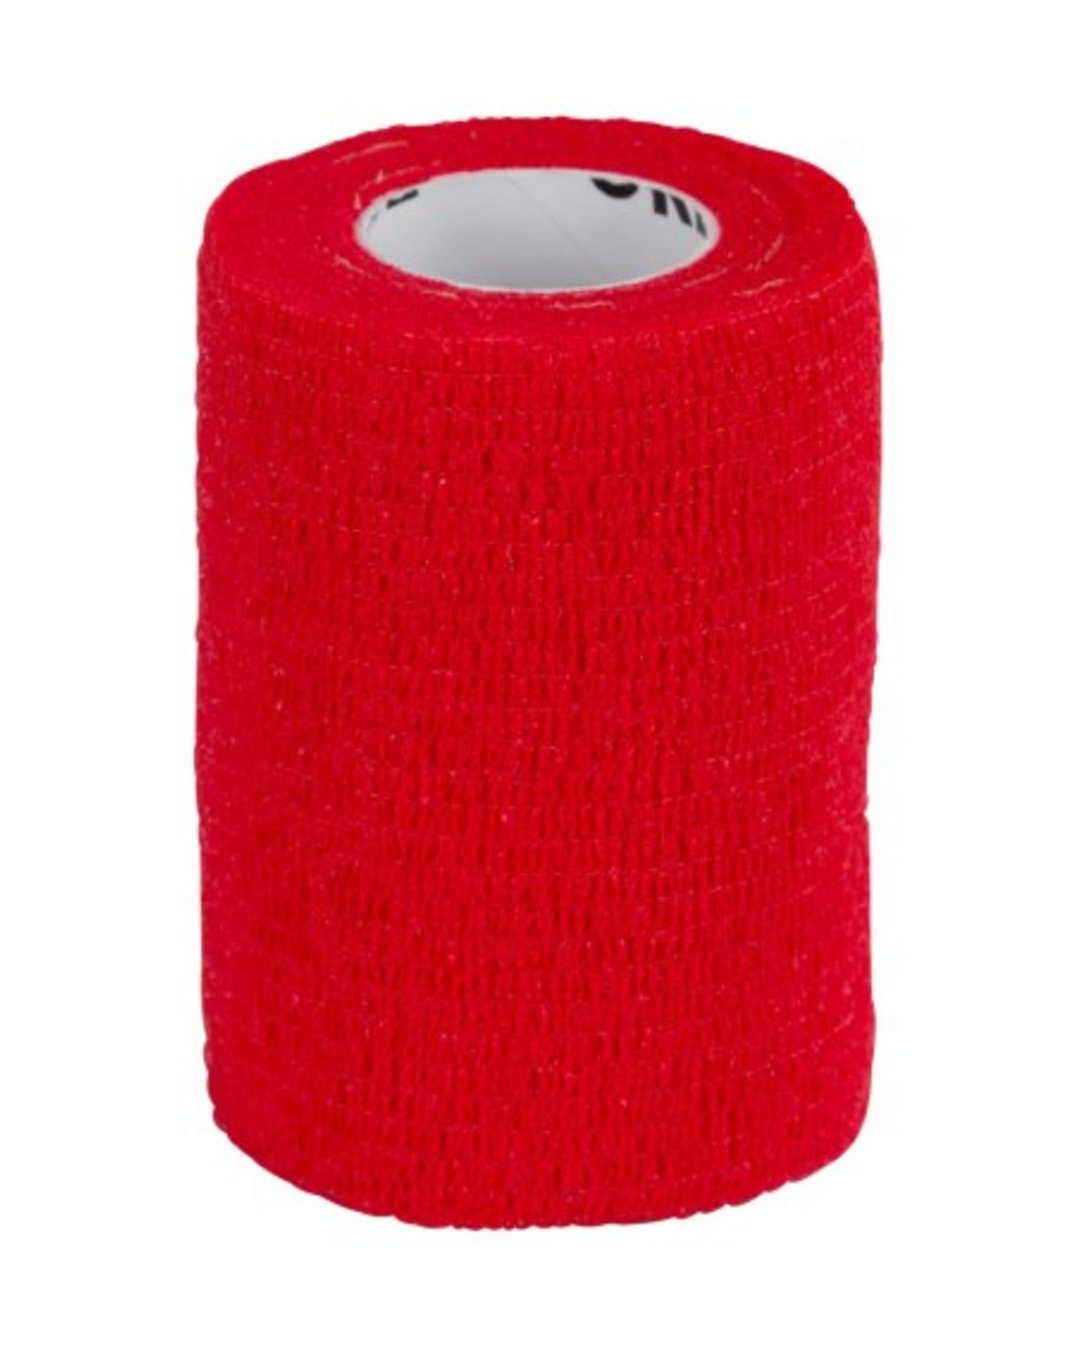 Selbsthaftende Bandage EquiLastic Rot 7,5 cm